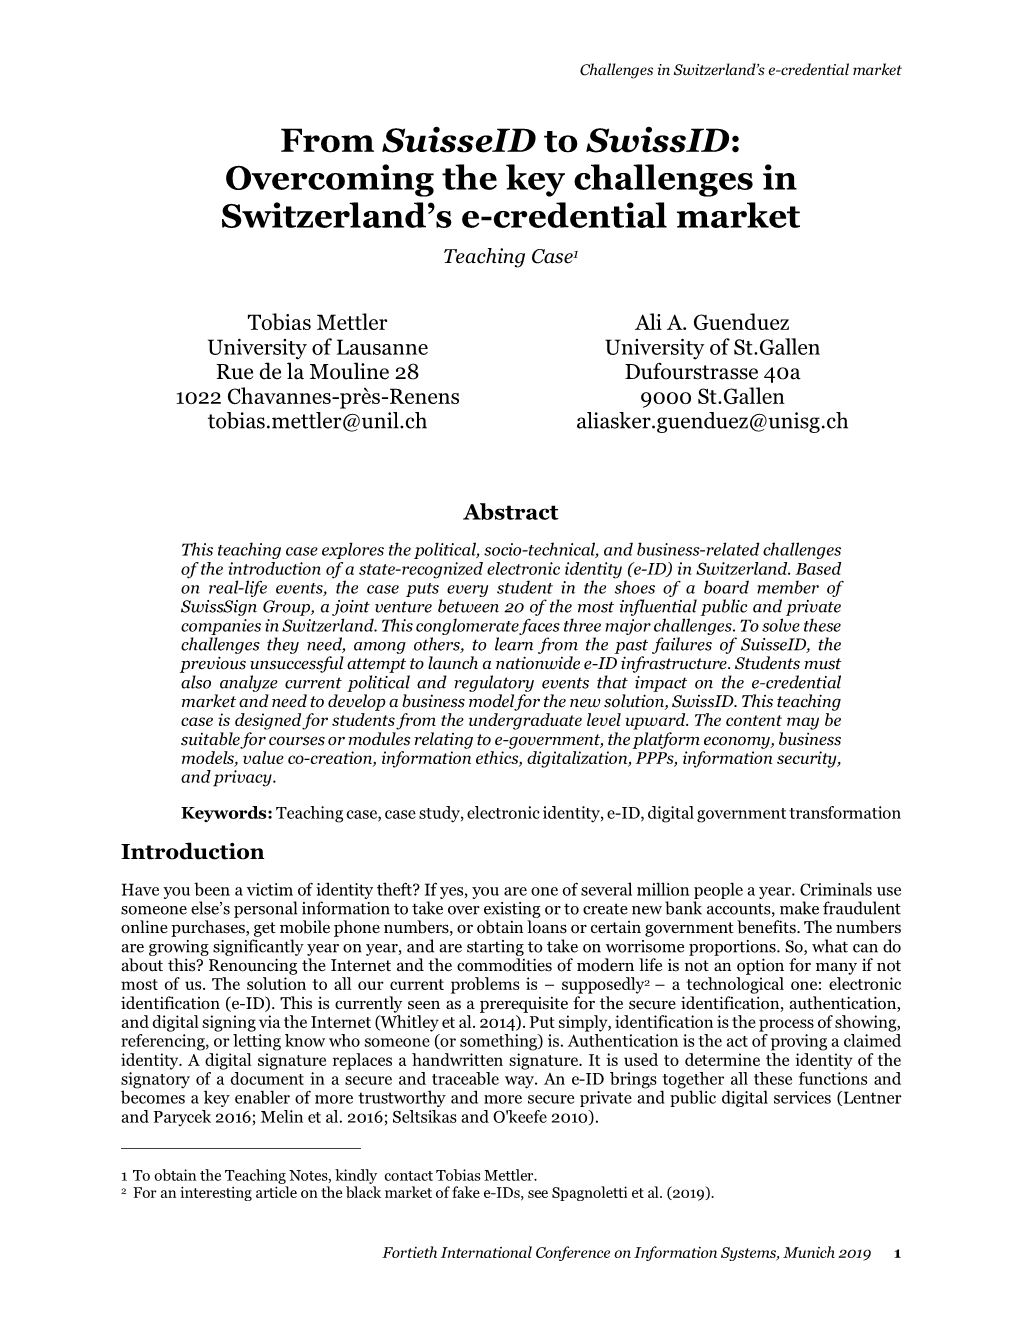 From Suisseid to Swissid: Overcoming the Key Challenges in Switzerland’S E-Credential Market Teaching Case1